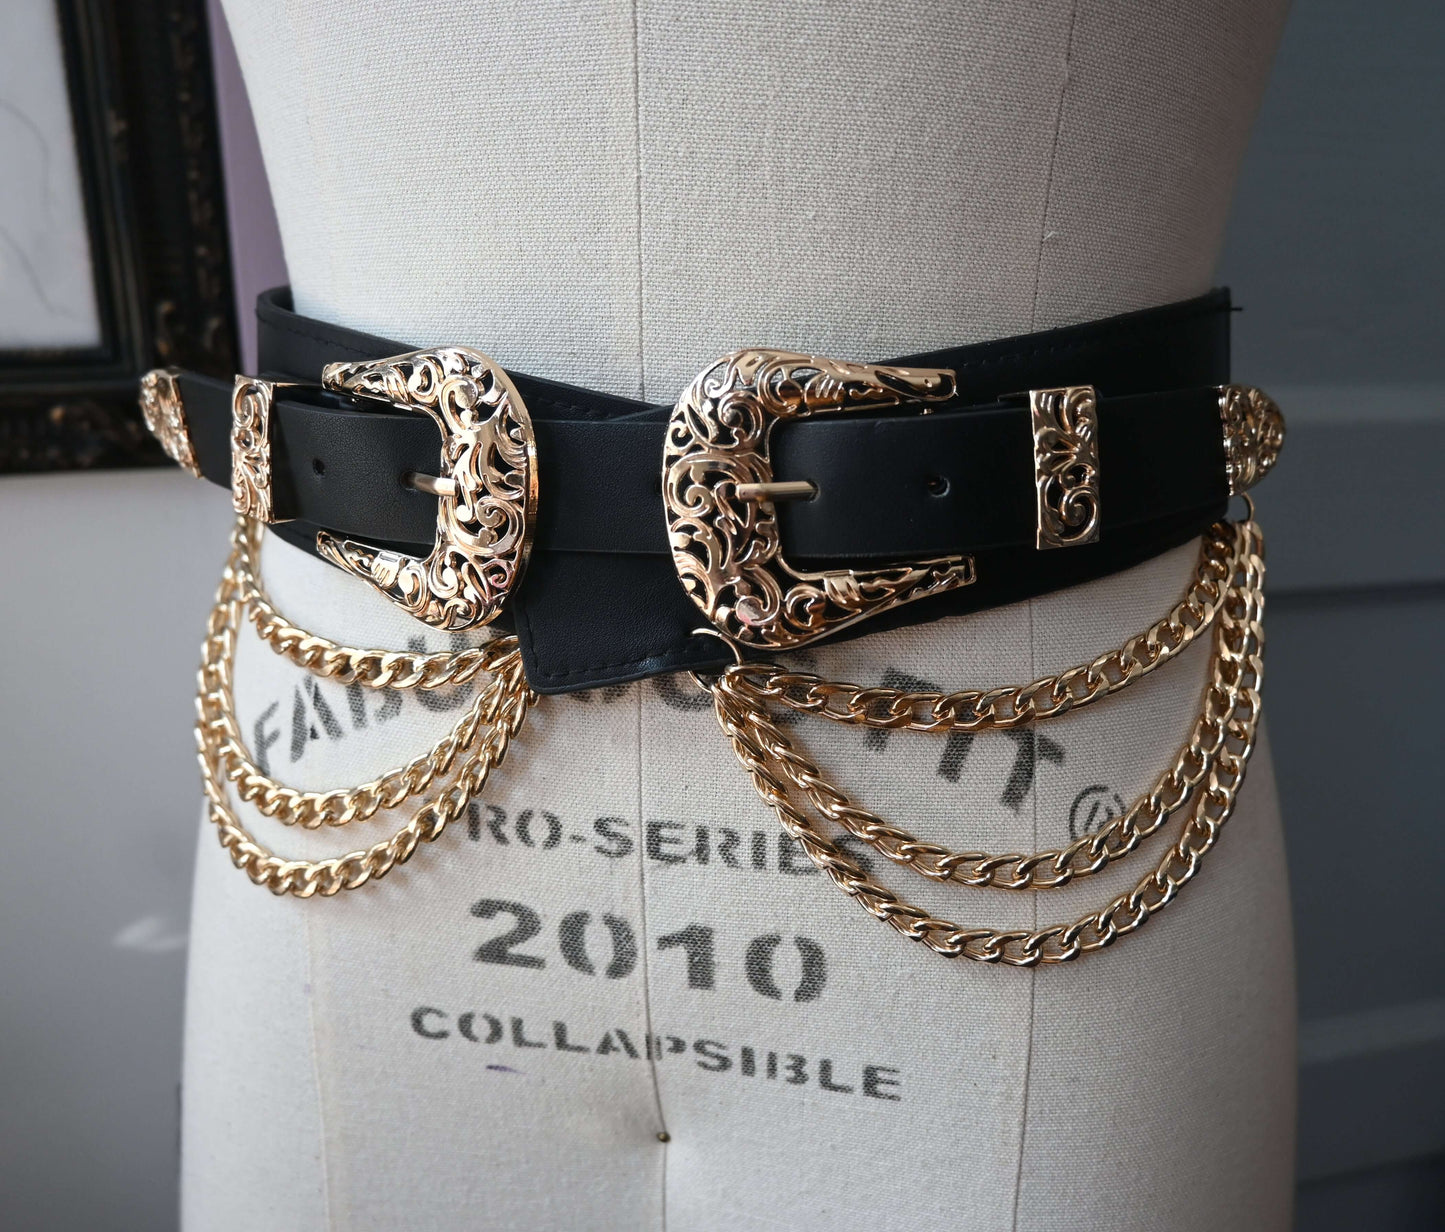 Western-style faux leather belt with double chains